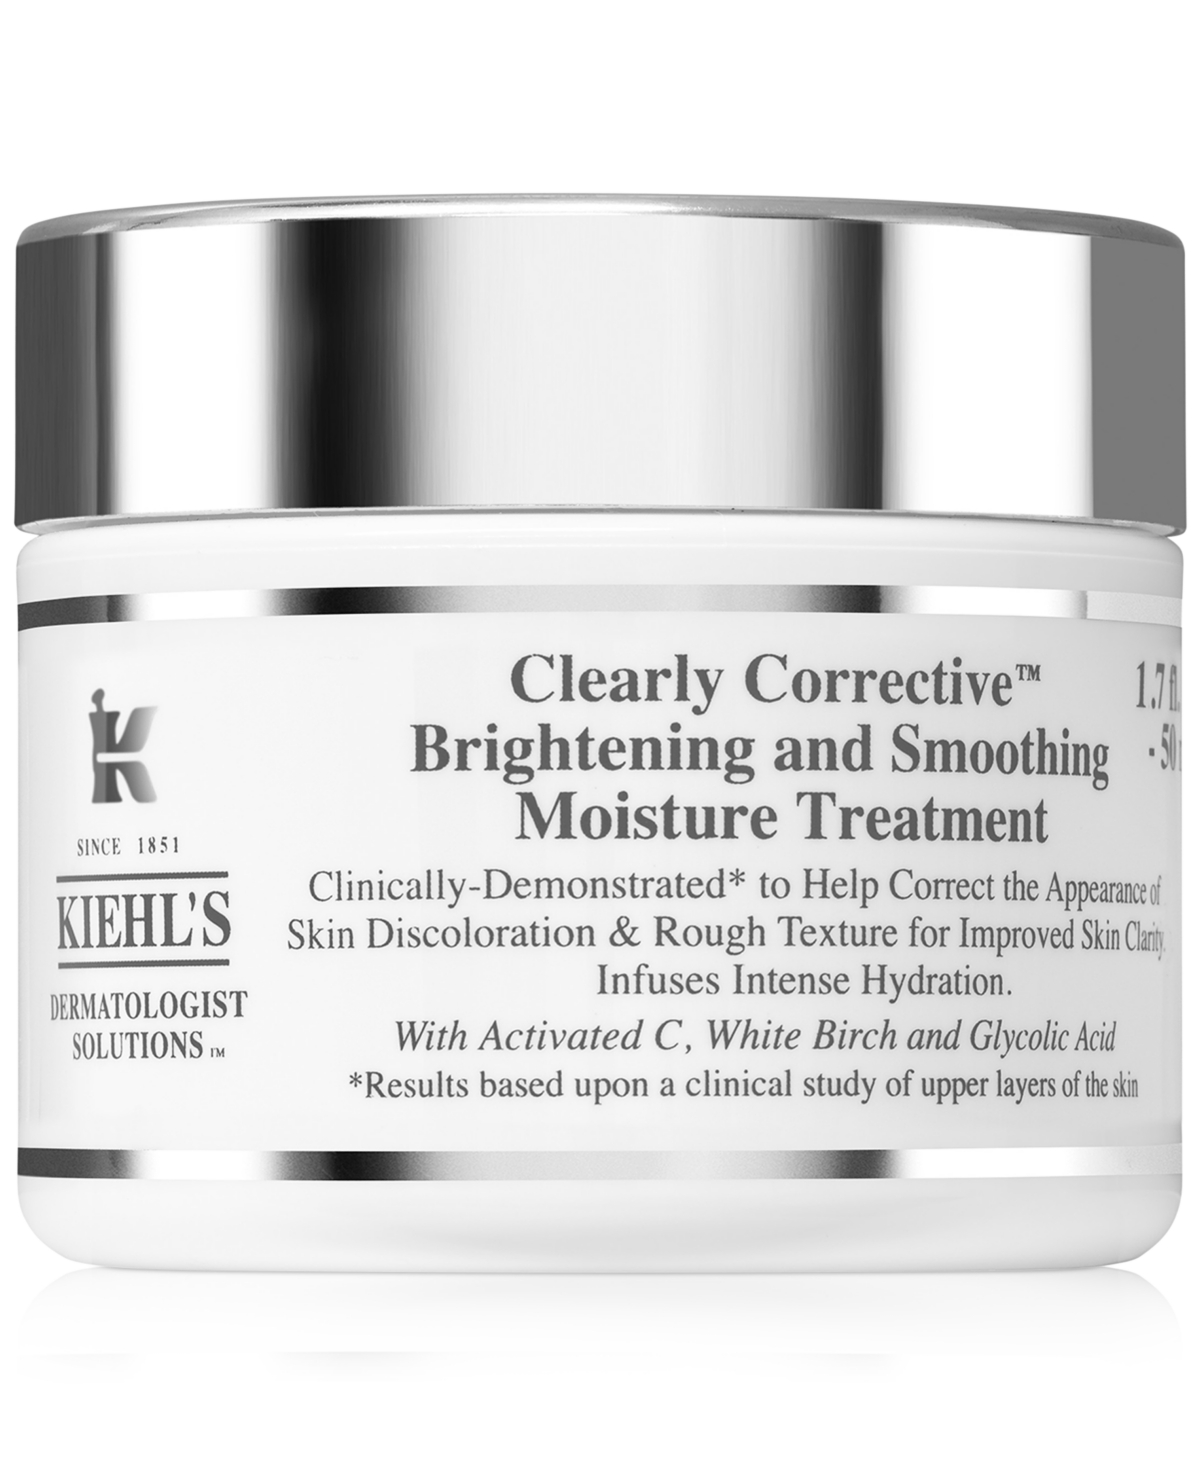 Clearly Corrective Brightening & Smoothing Moisture Treatment, 1.7-oz.